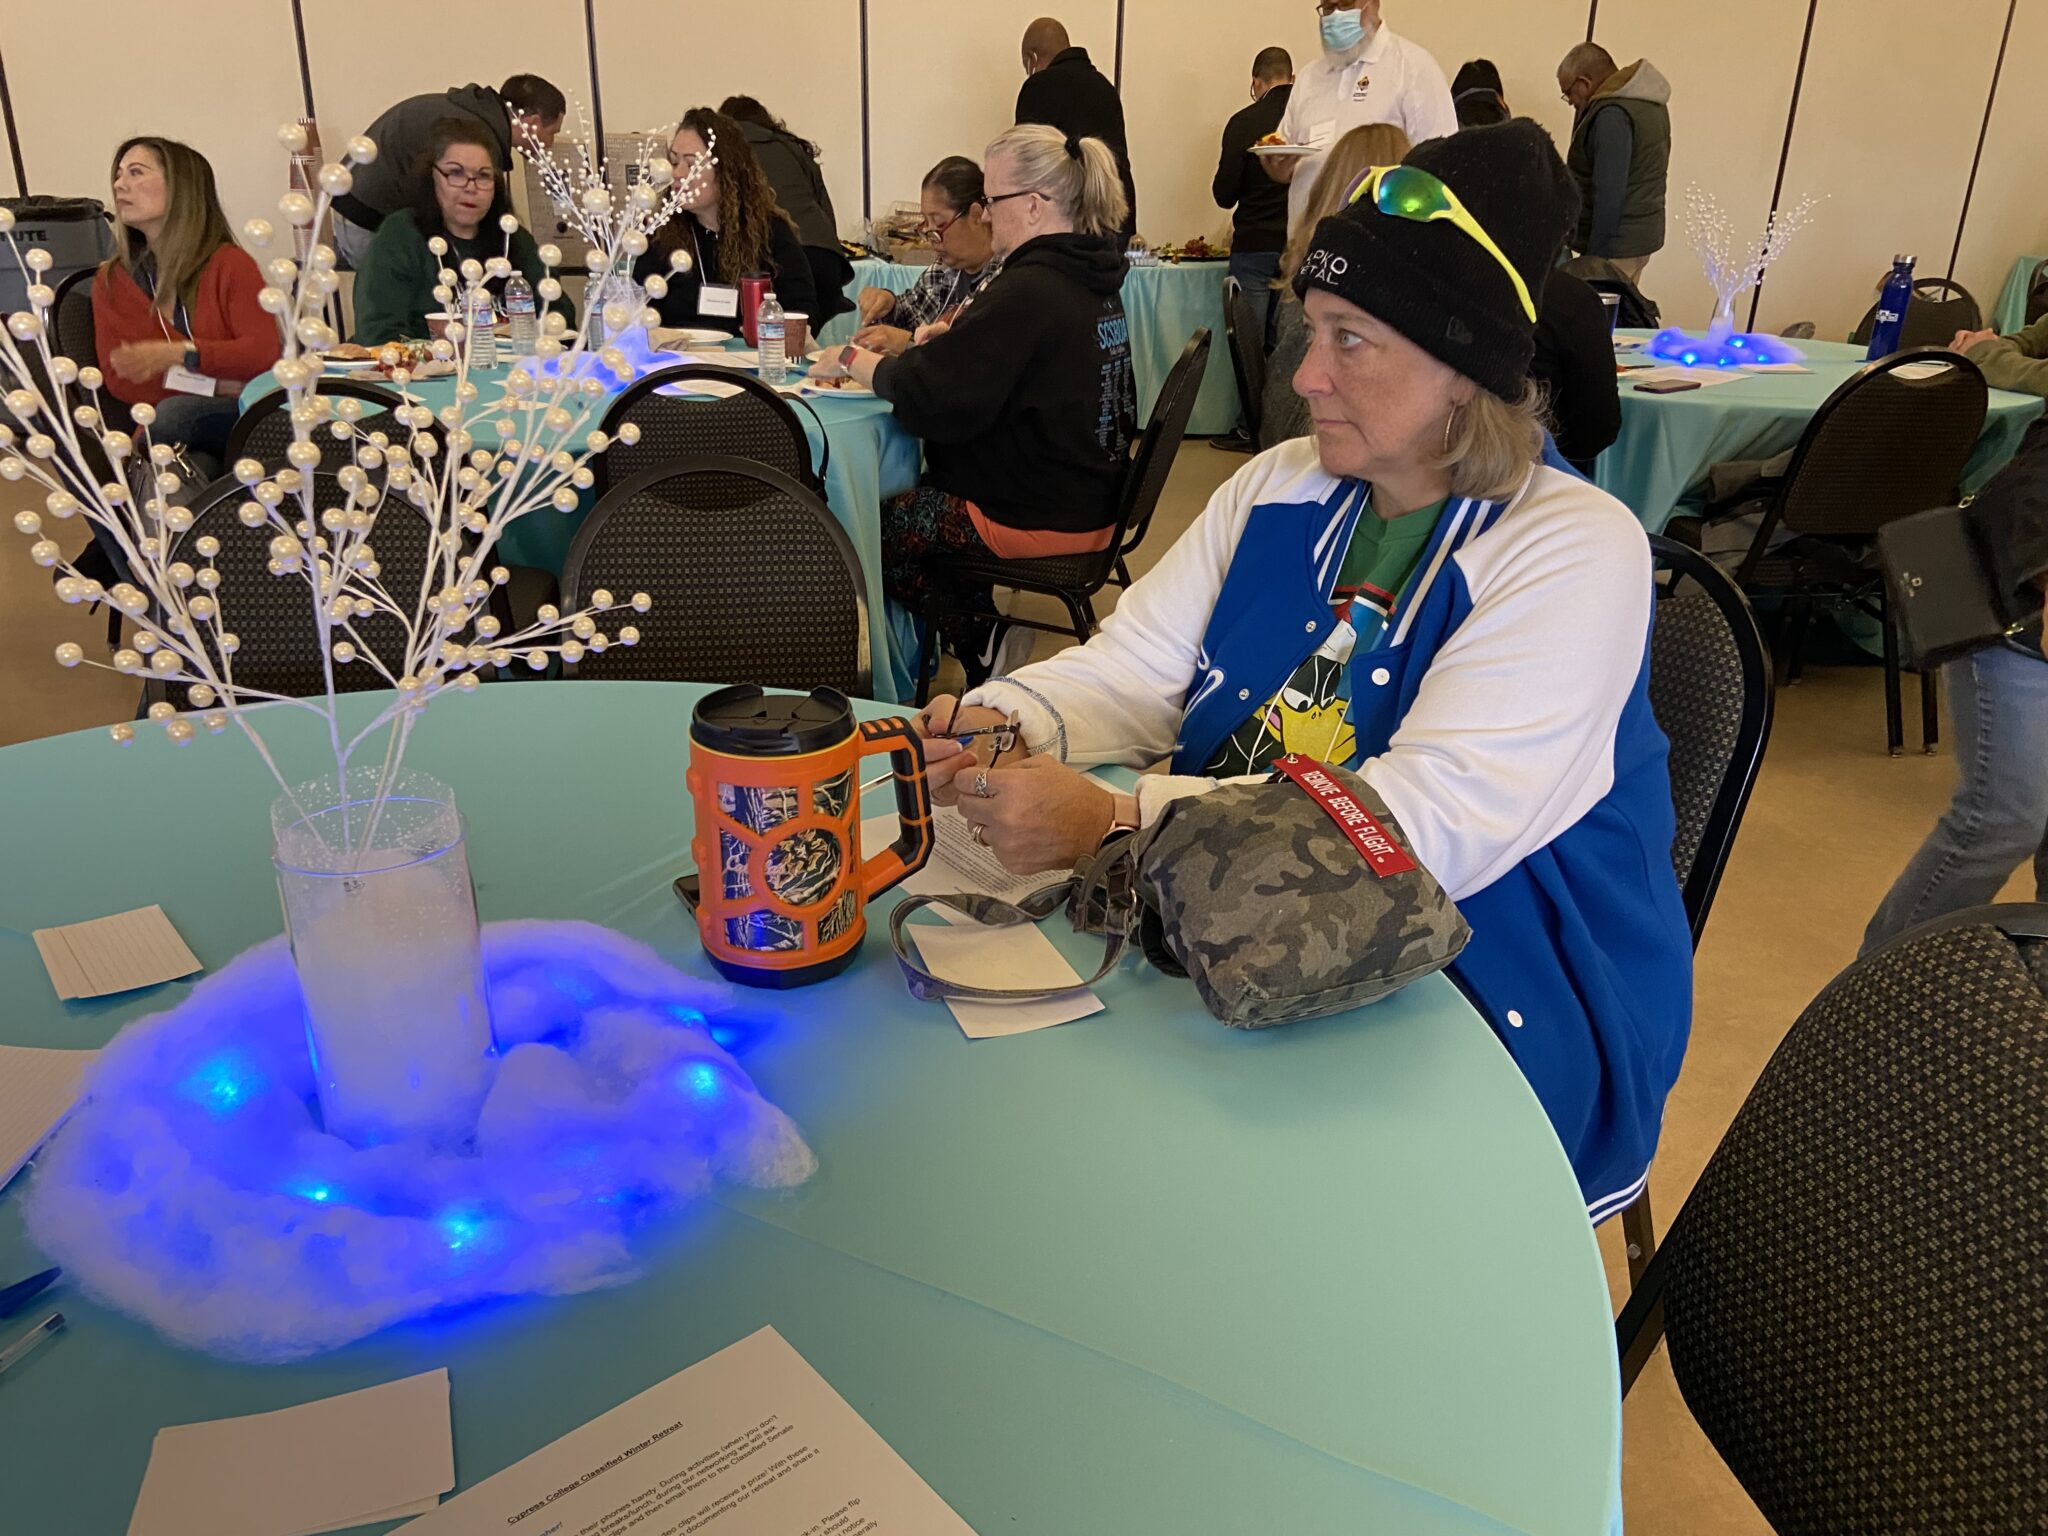 A classified staff member sitting at a winter themed decorated table and listening to the presentation.